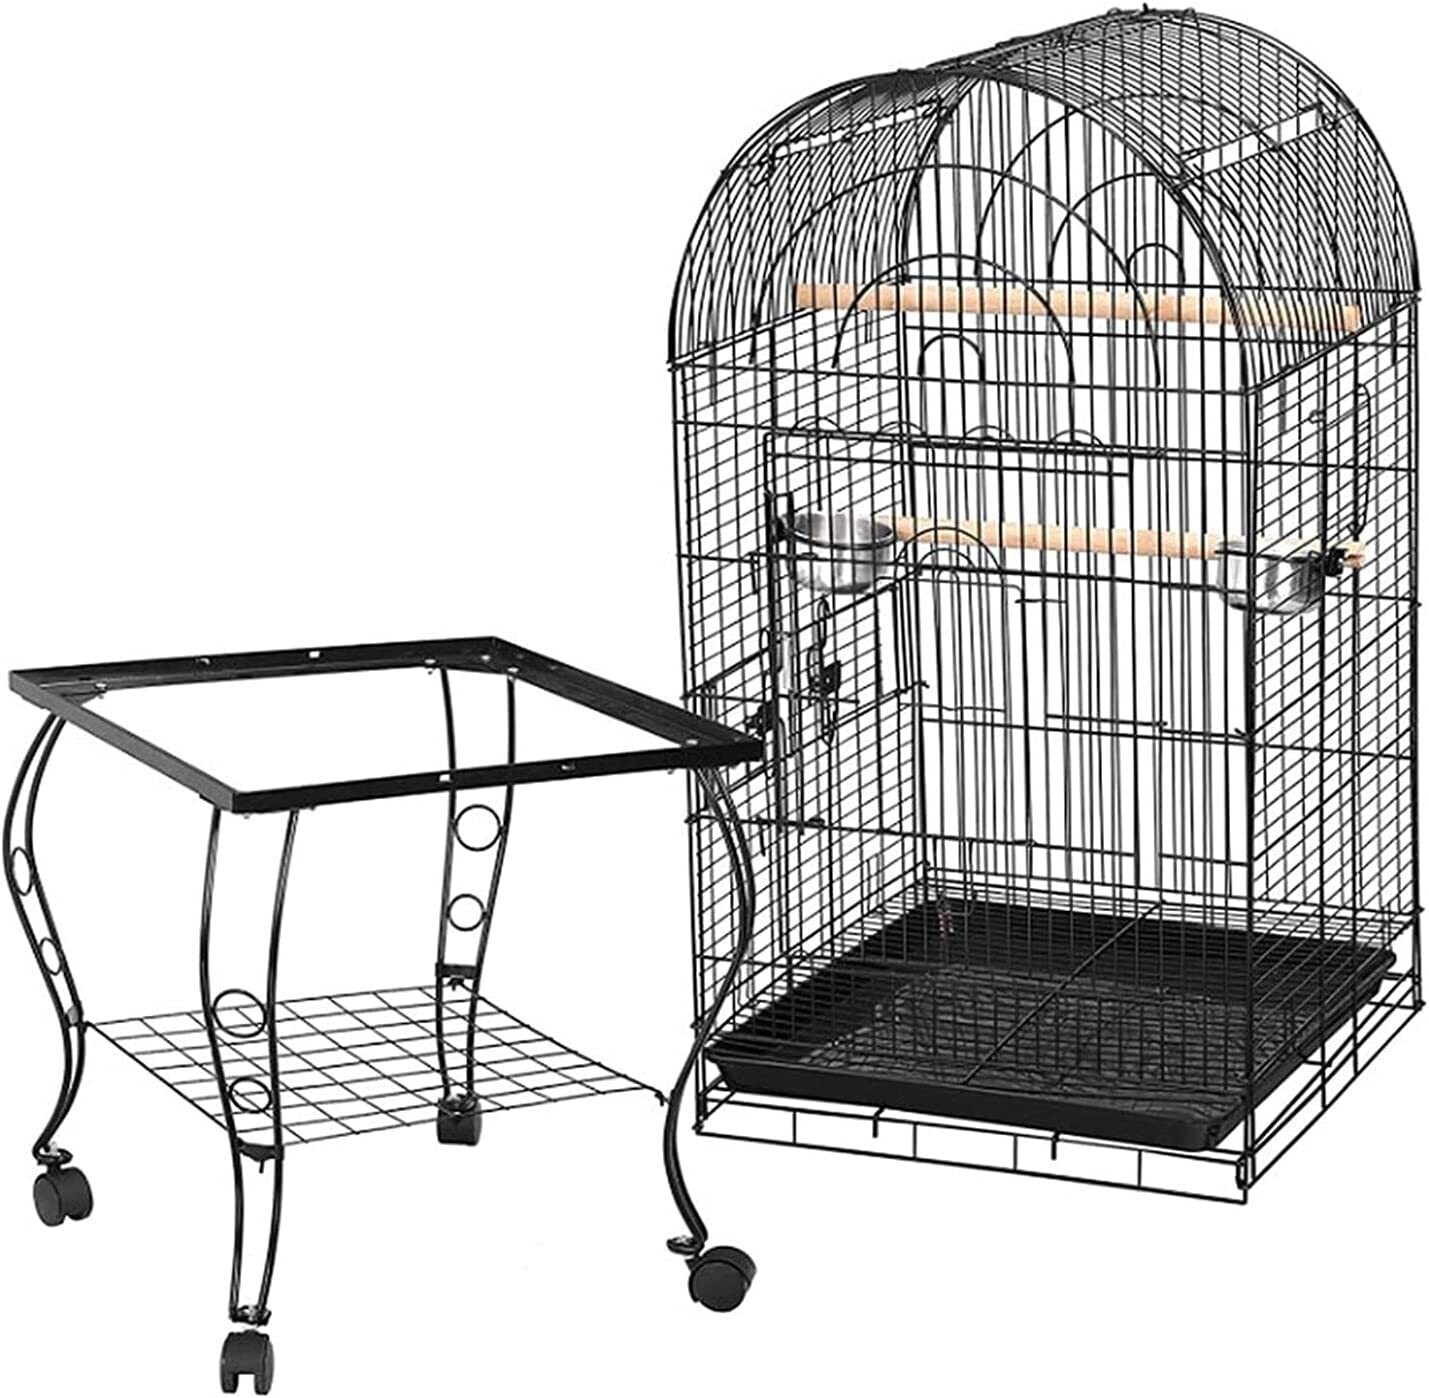 Large Wrought Iron Bird Cage for Cockatoo, Parrot, and Other Small Birds